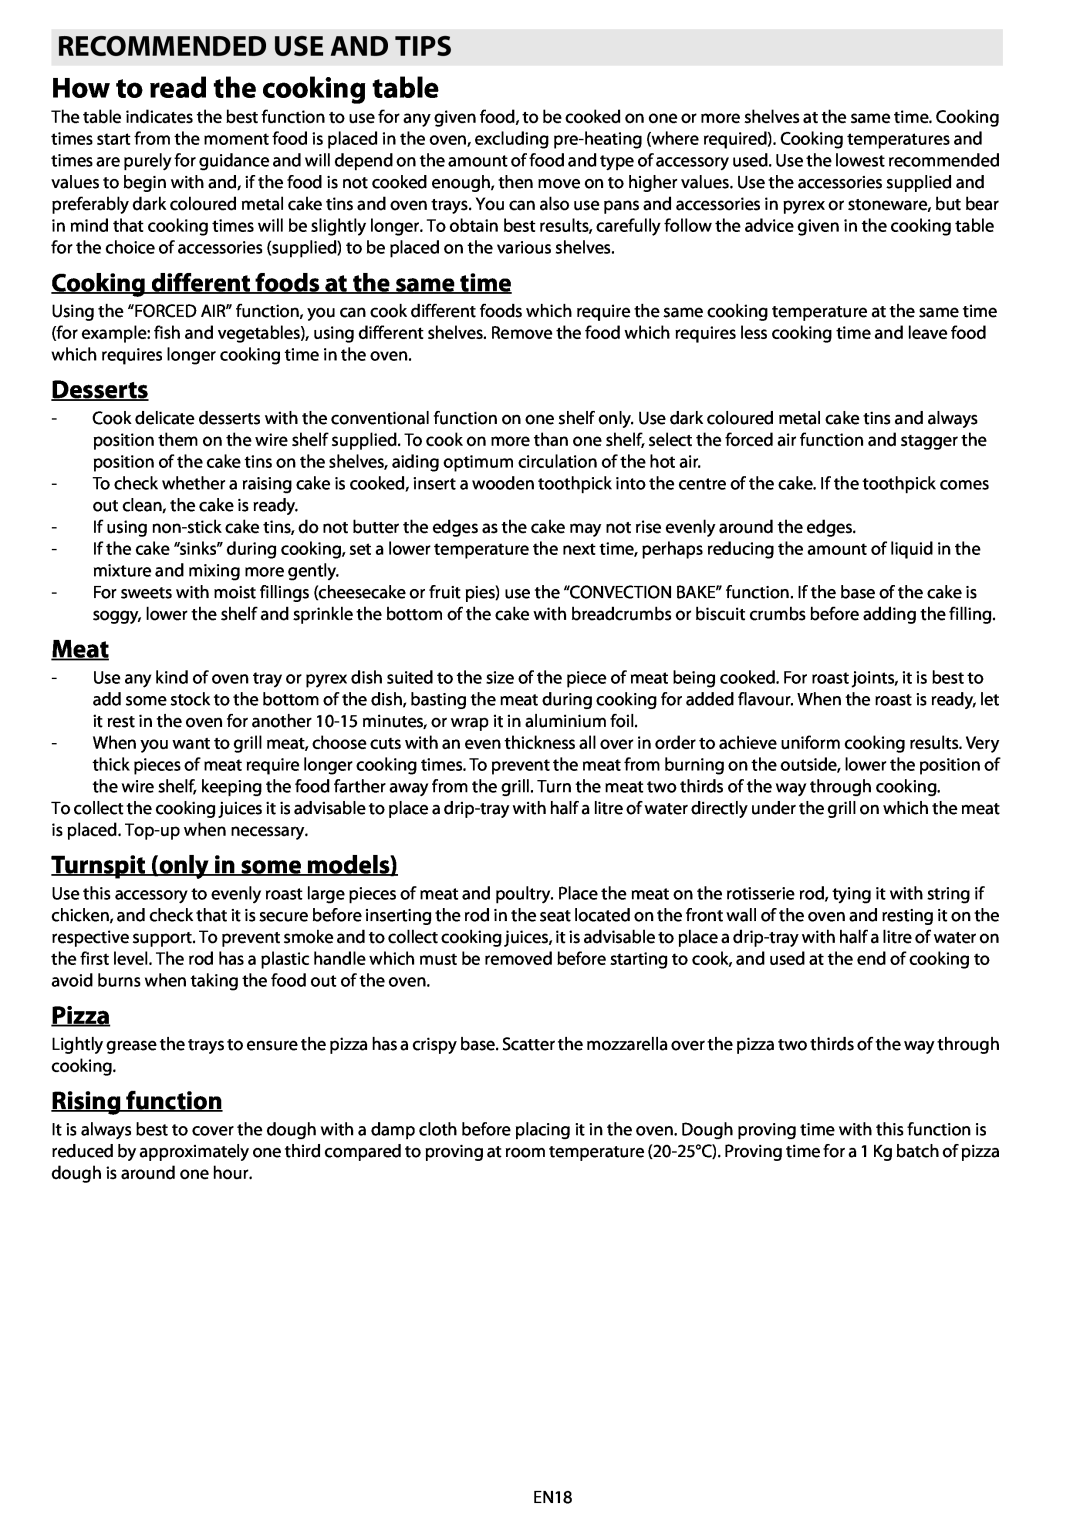 Whirlpool AKZ 562 RECOMMENDED USE AND TIPS How to read the cooking table, Cooking different foods at the same time, Meat 